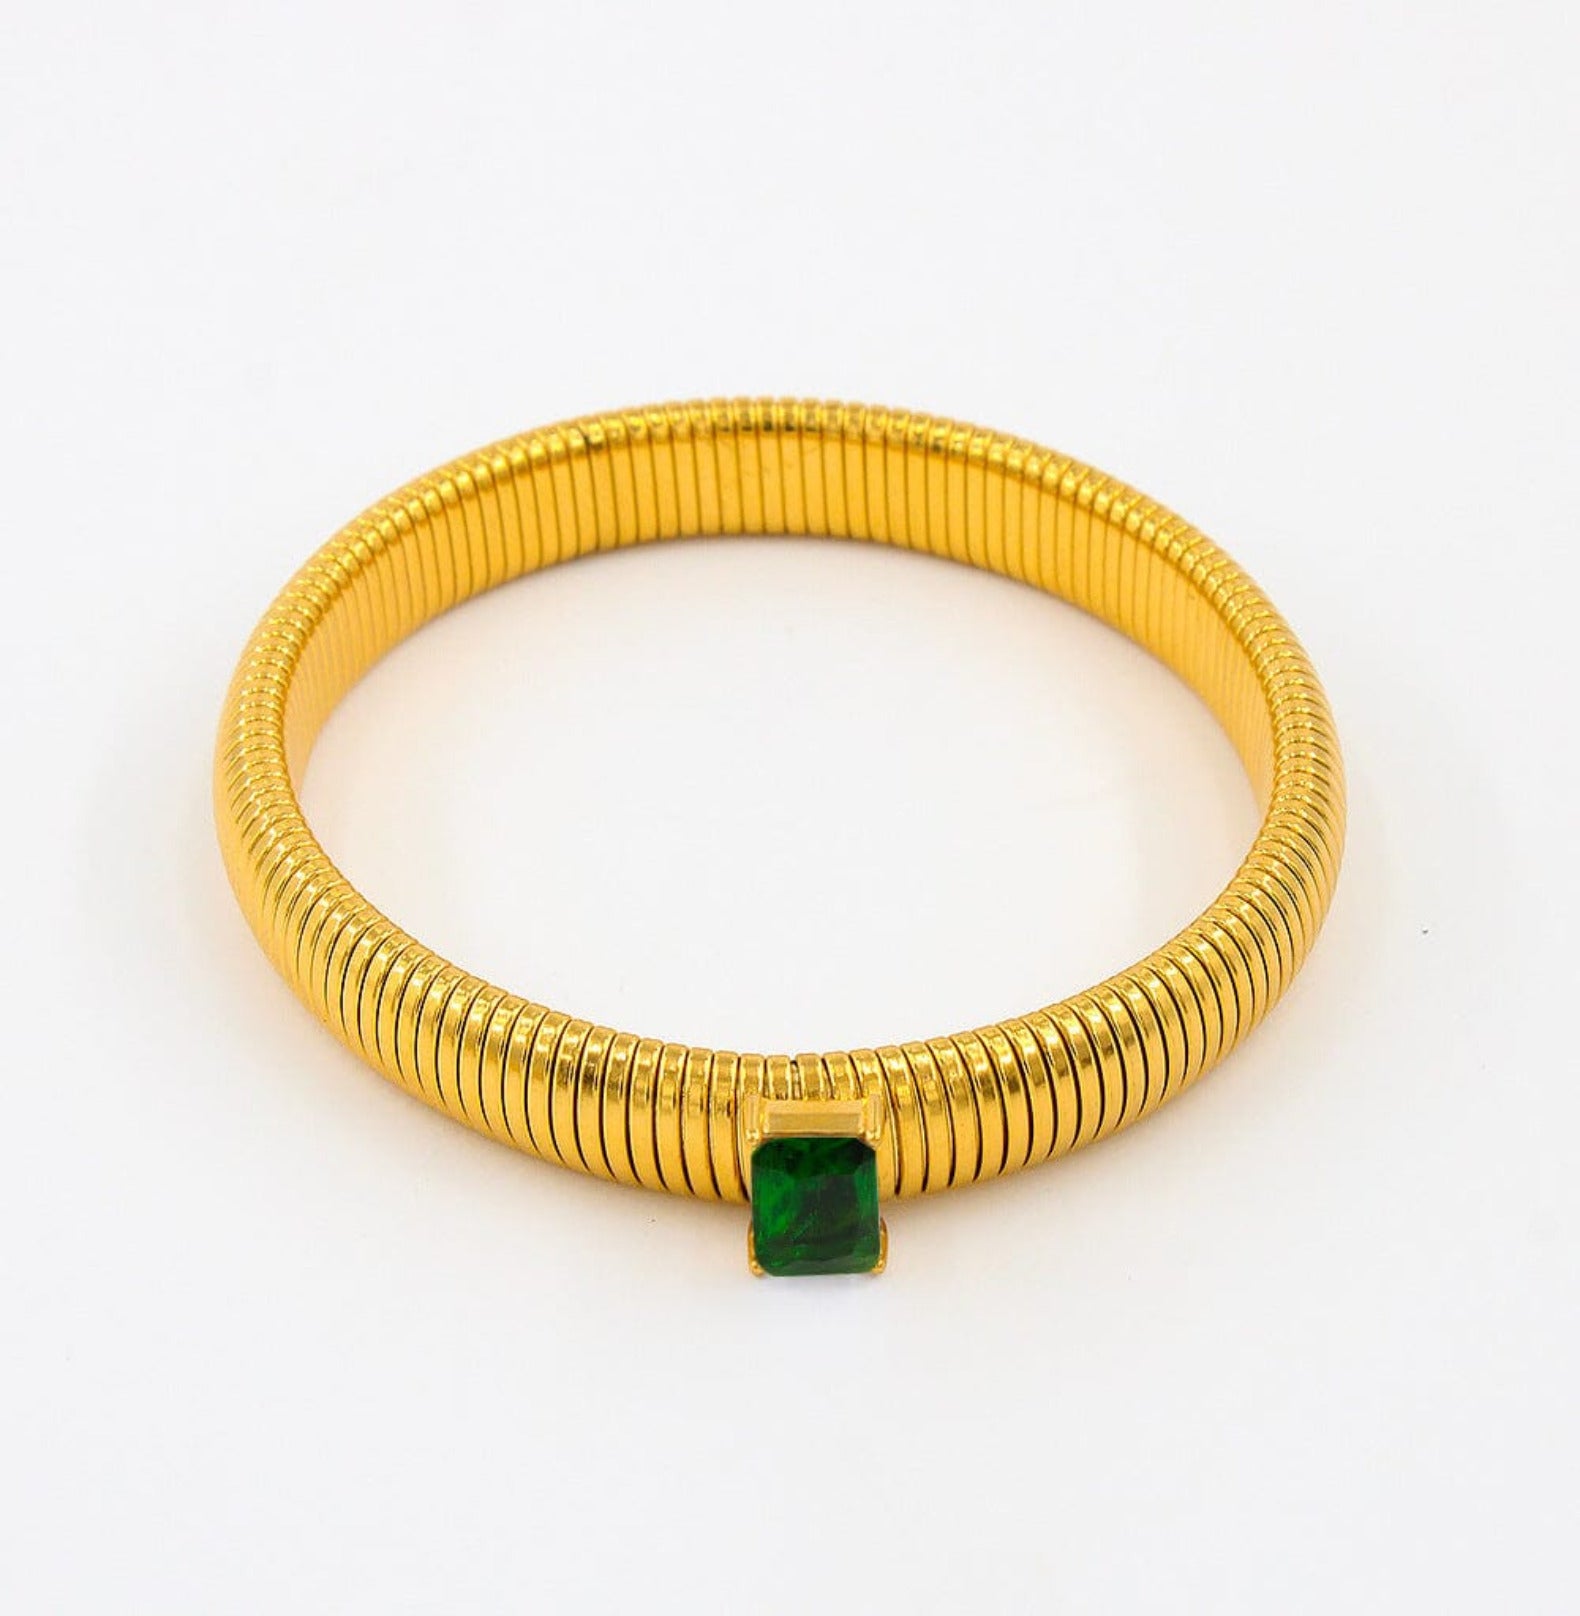 CHUNKY STONE BANGLE BRACELET - GOLD braclet Yubama Jewelry Online Store - The Elegant Designs of Gold and Silver ! Emerald Diamond 12mm 18cm 